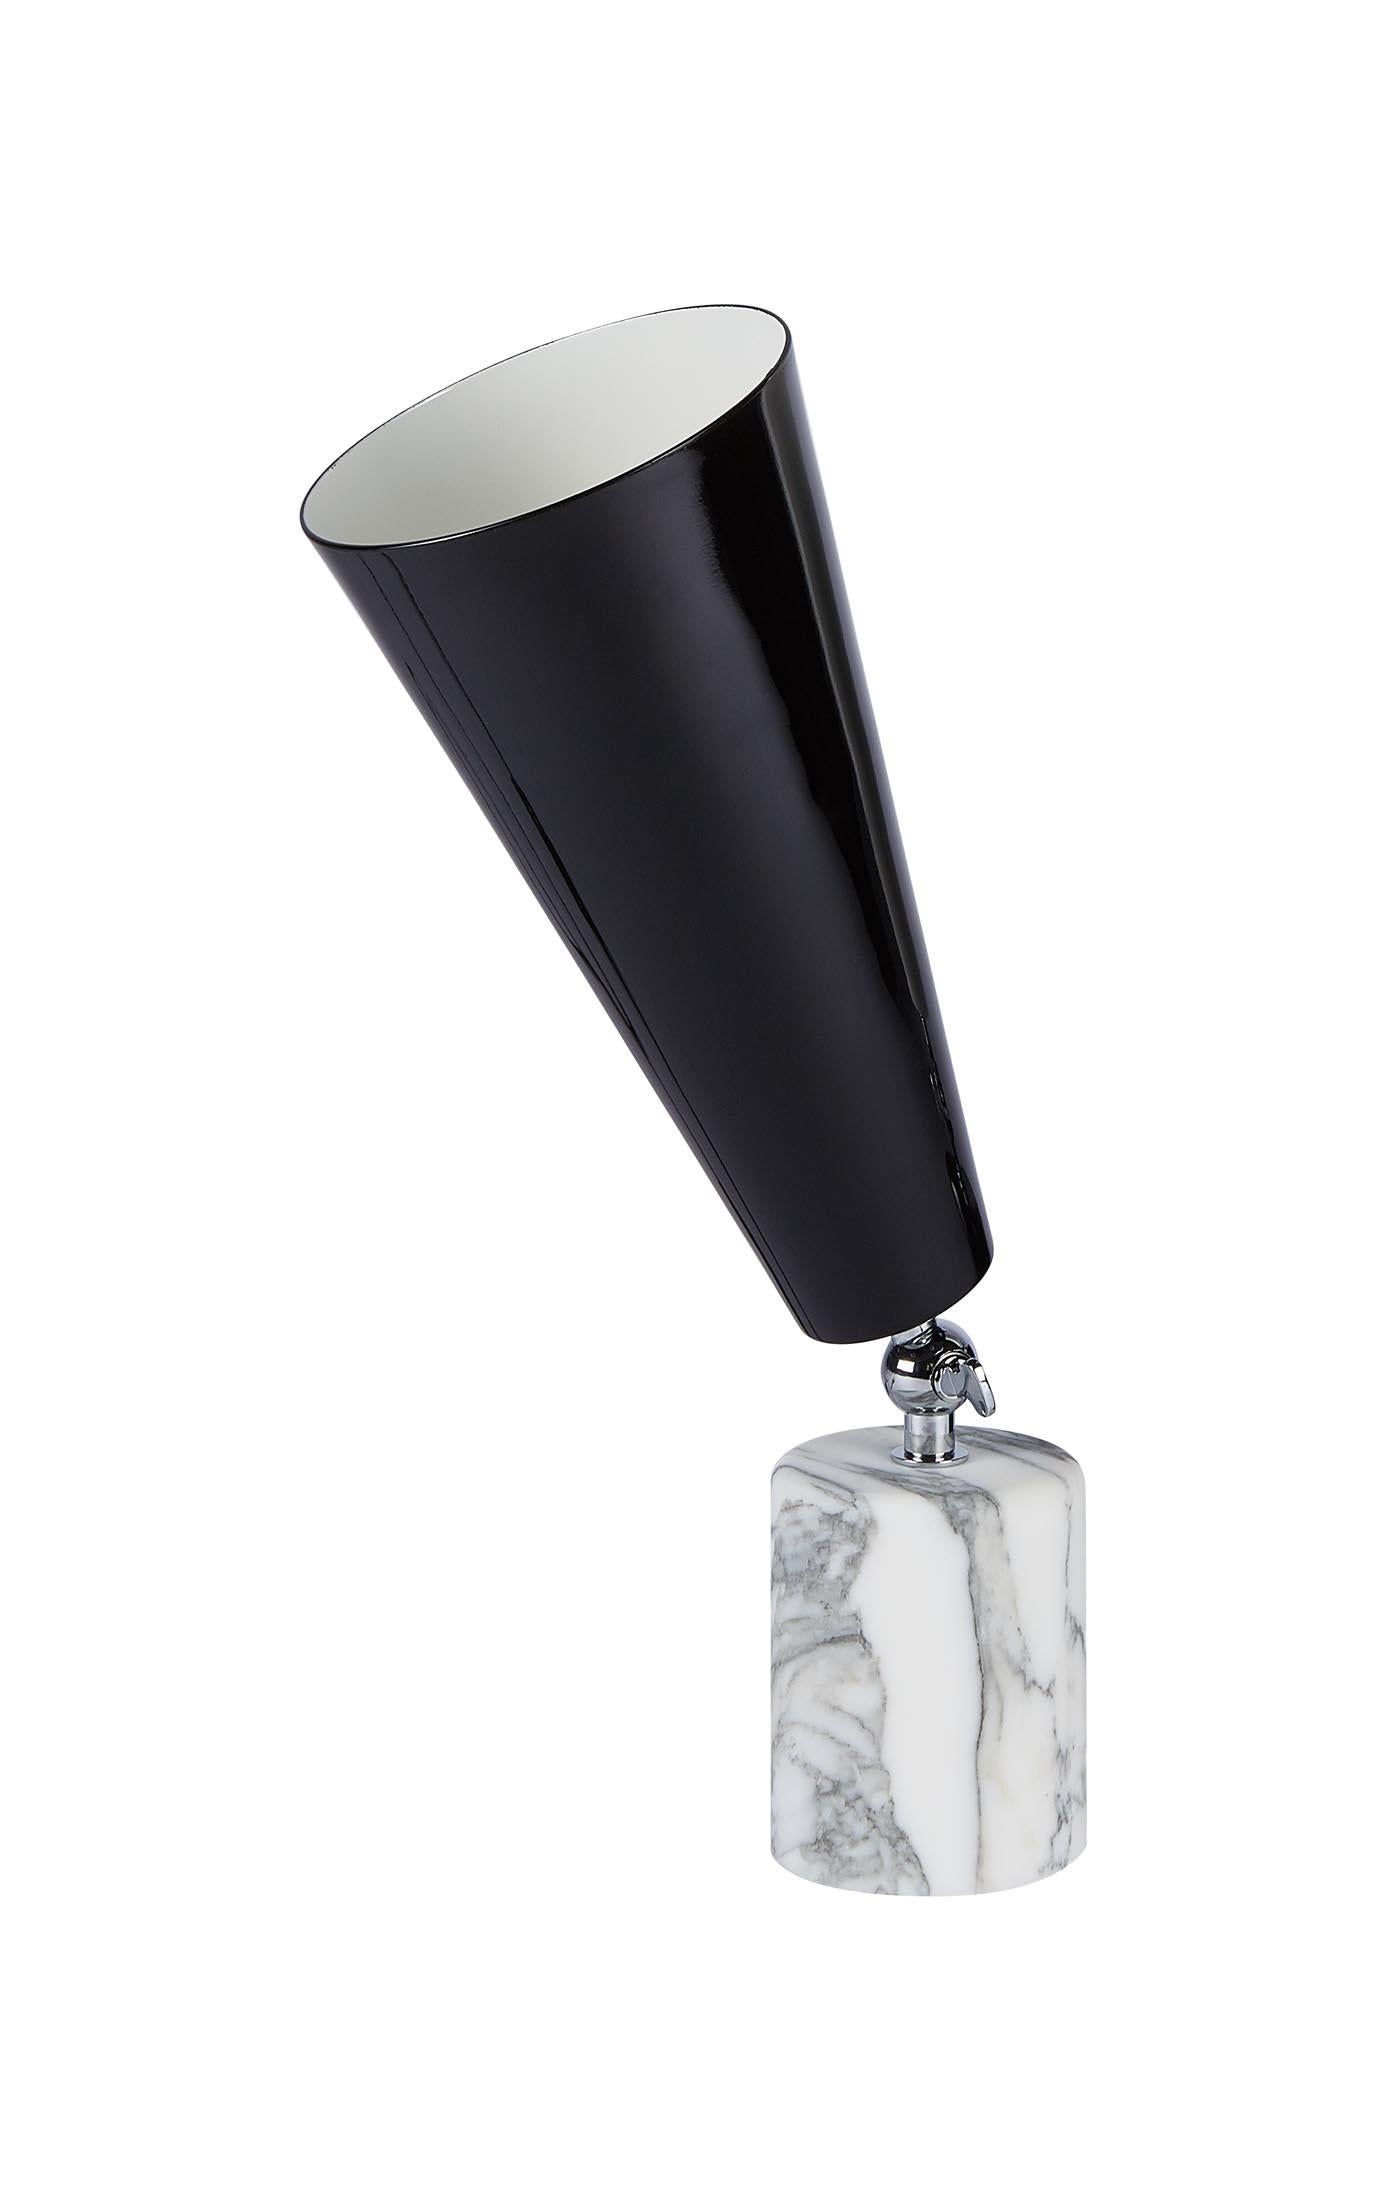 Tato Italia 'Vox' Table Lamp in White Carrara Marble, Chrome, and Glossy Black. Designed by Lorenza Bozzoli in 2016. 

Price is per item. Available to order in unlimited quantities. Available in 15.7